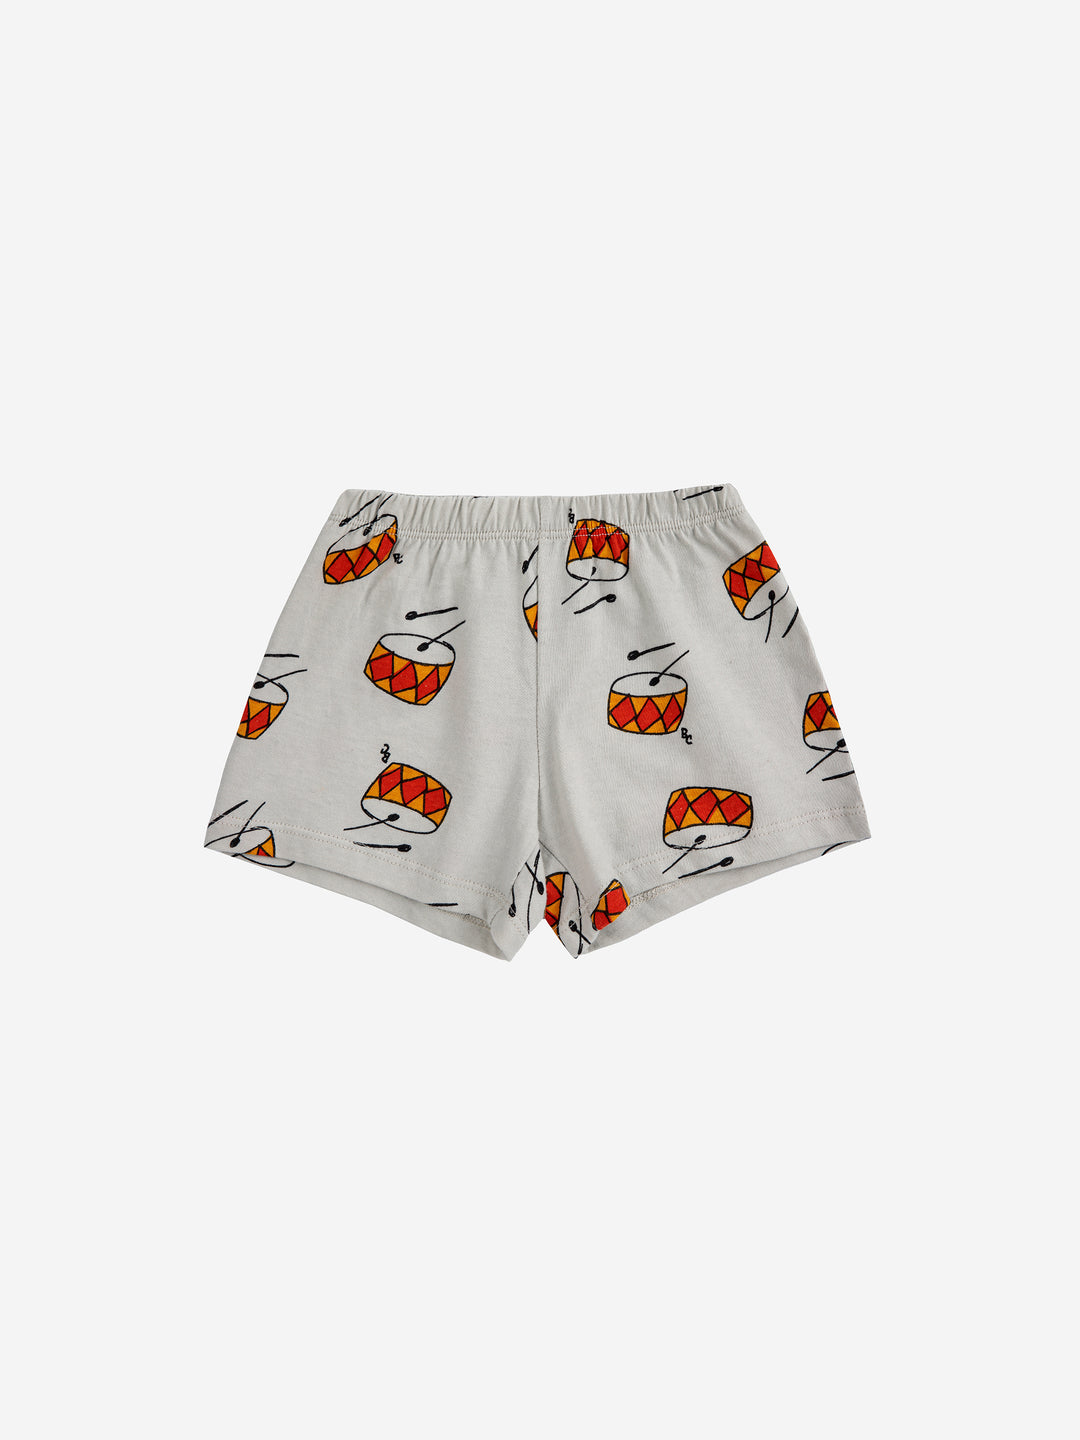 Play The Drums Shorts by Bobo Choses